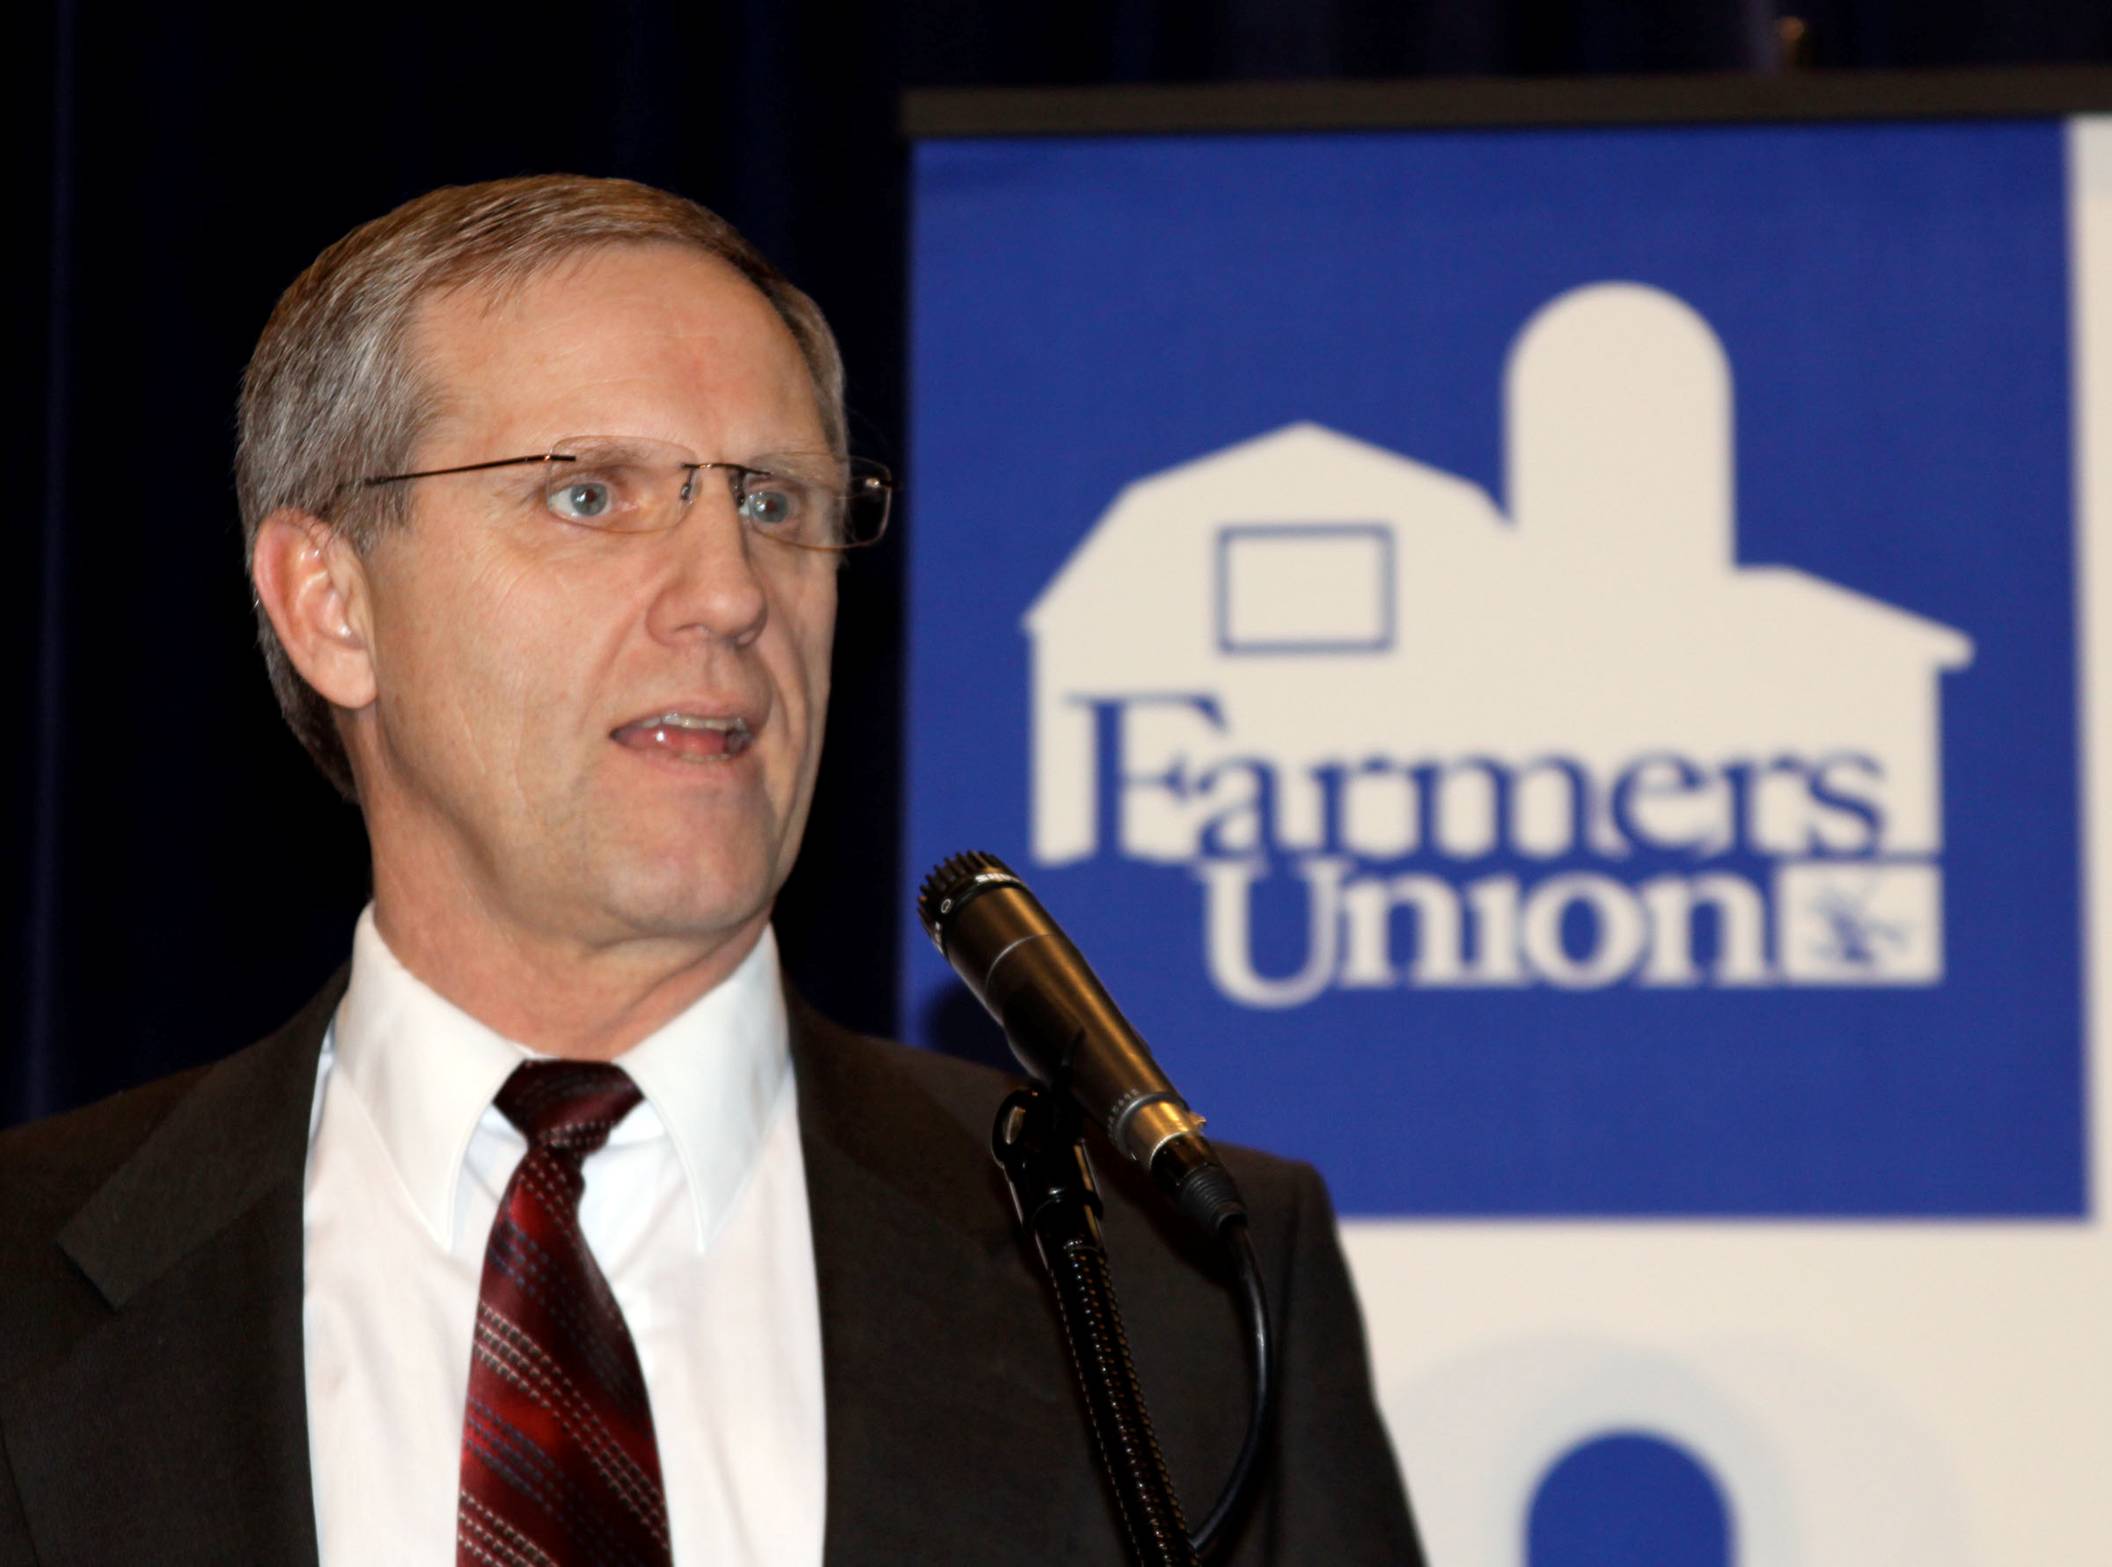 National Farmers Union says Safety Net is a Top Priority for Next Farm Bill